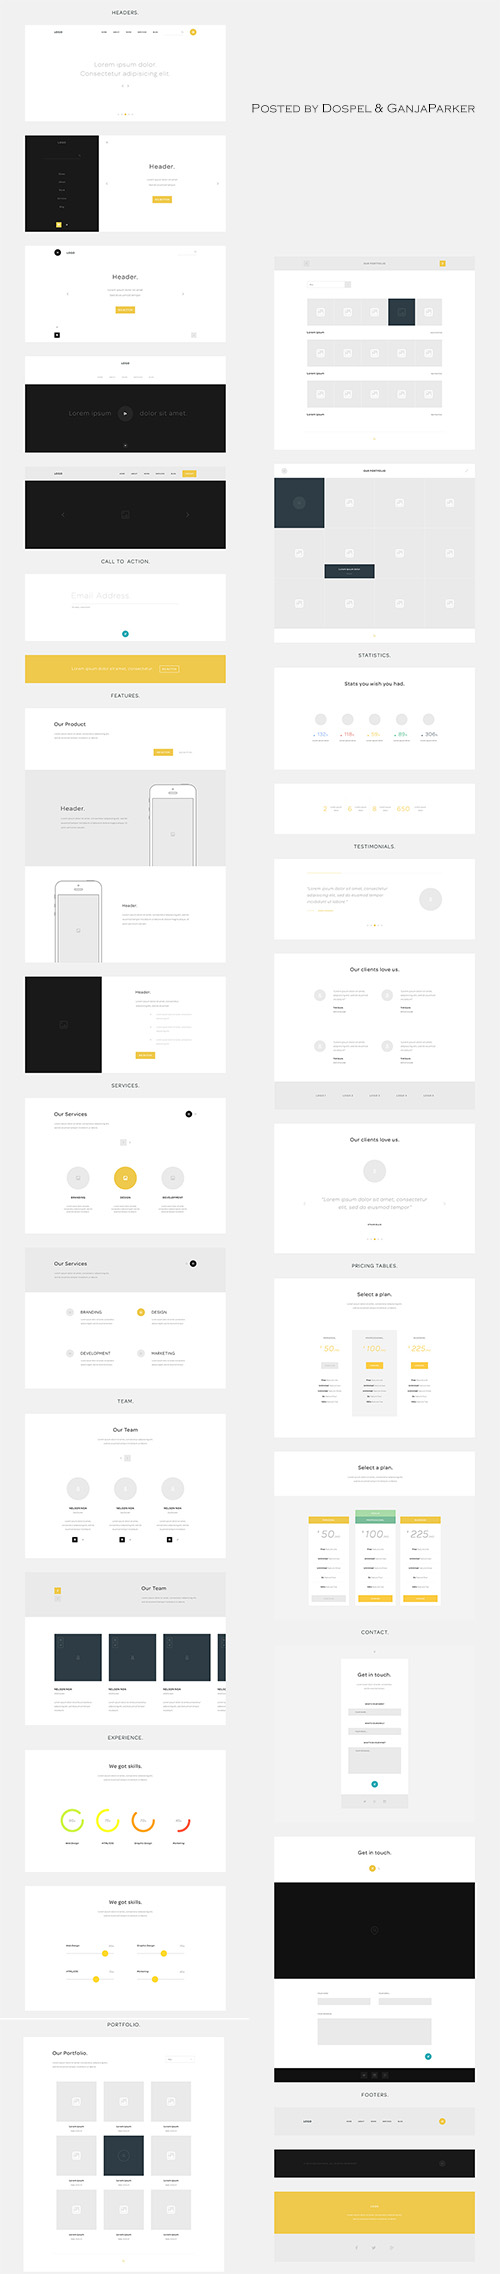 PSD Web Design - One Page Website Wireframes Vol.2